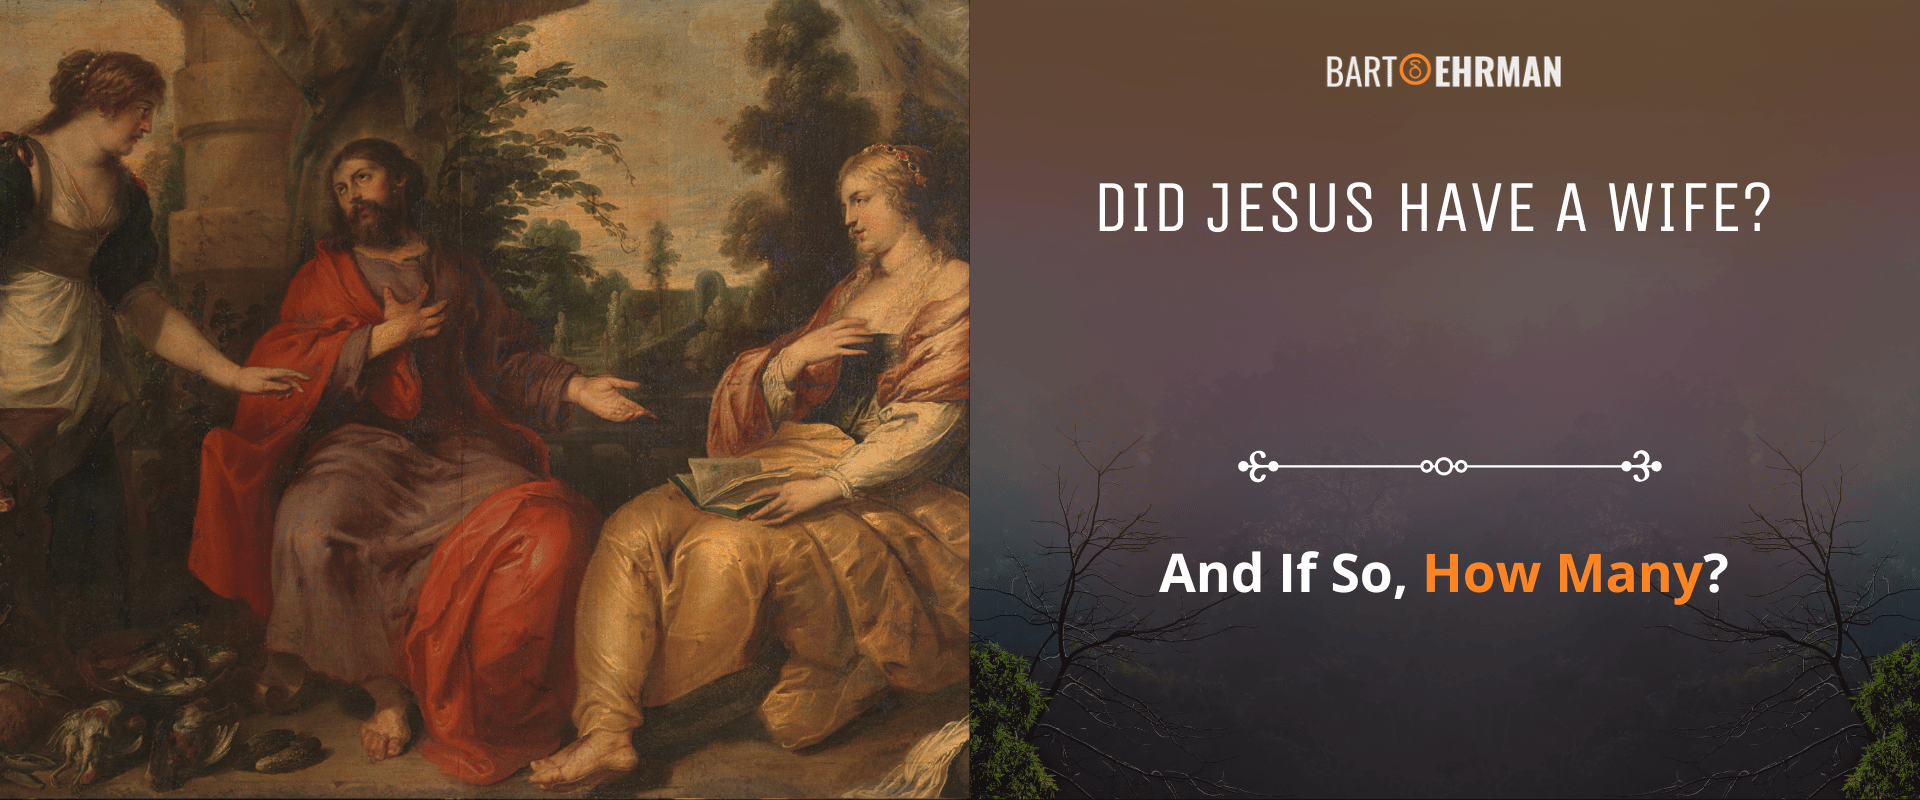 Did Jesus Have a Wife And If So, How Many